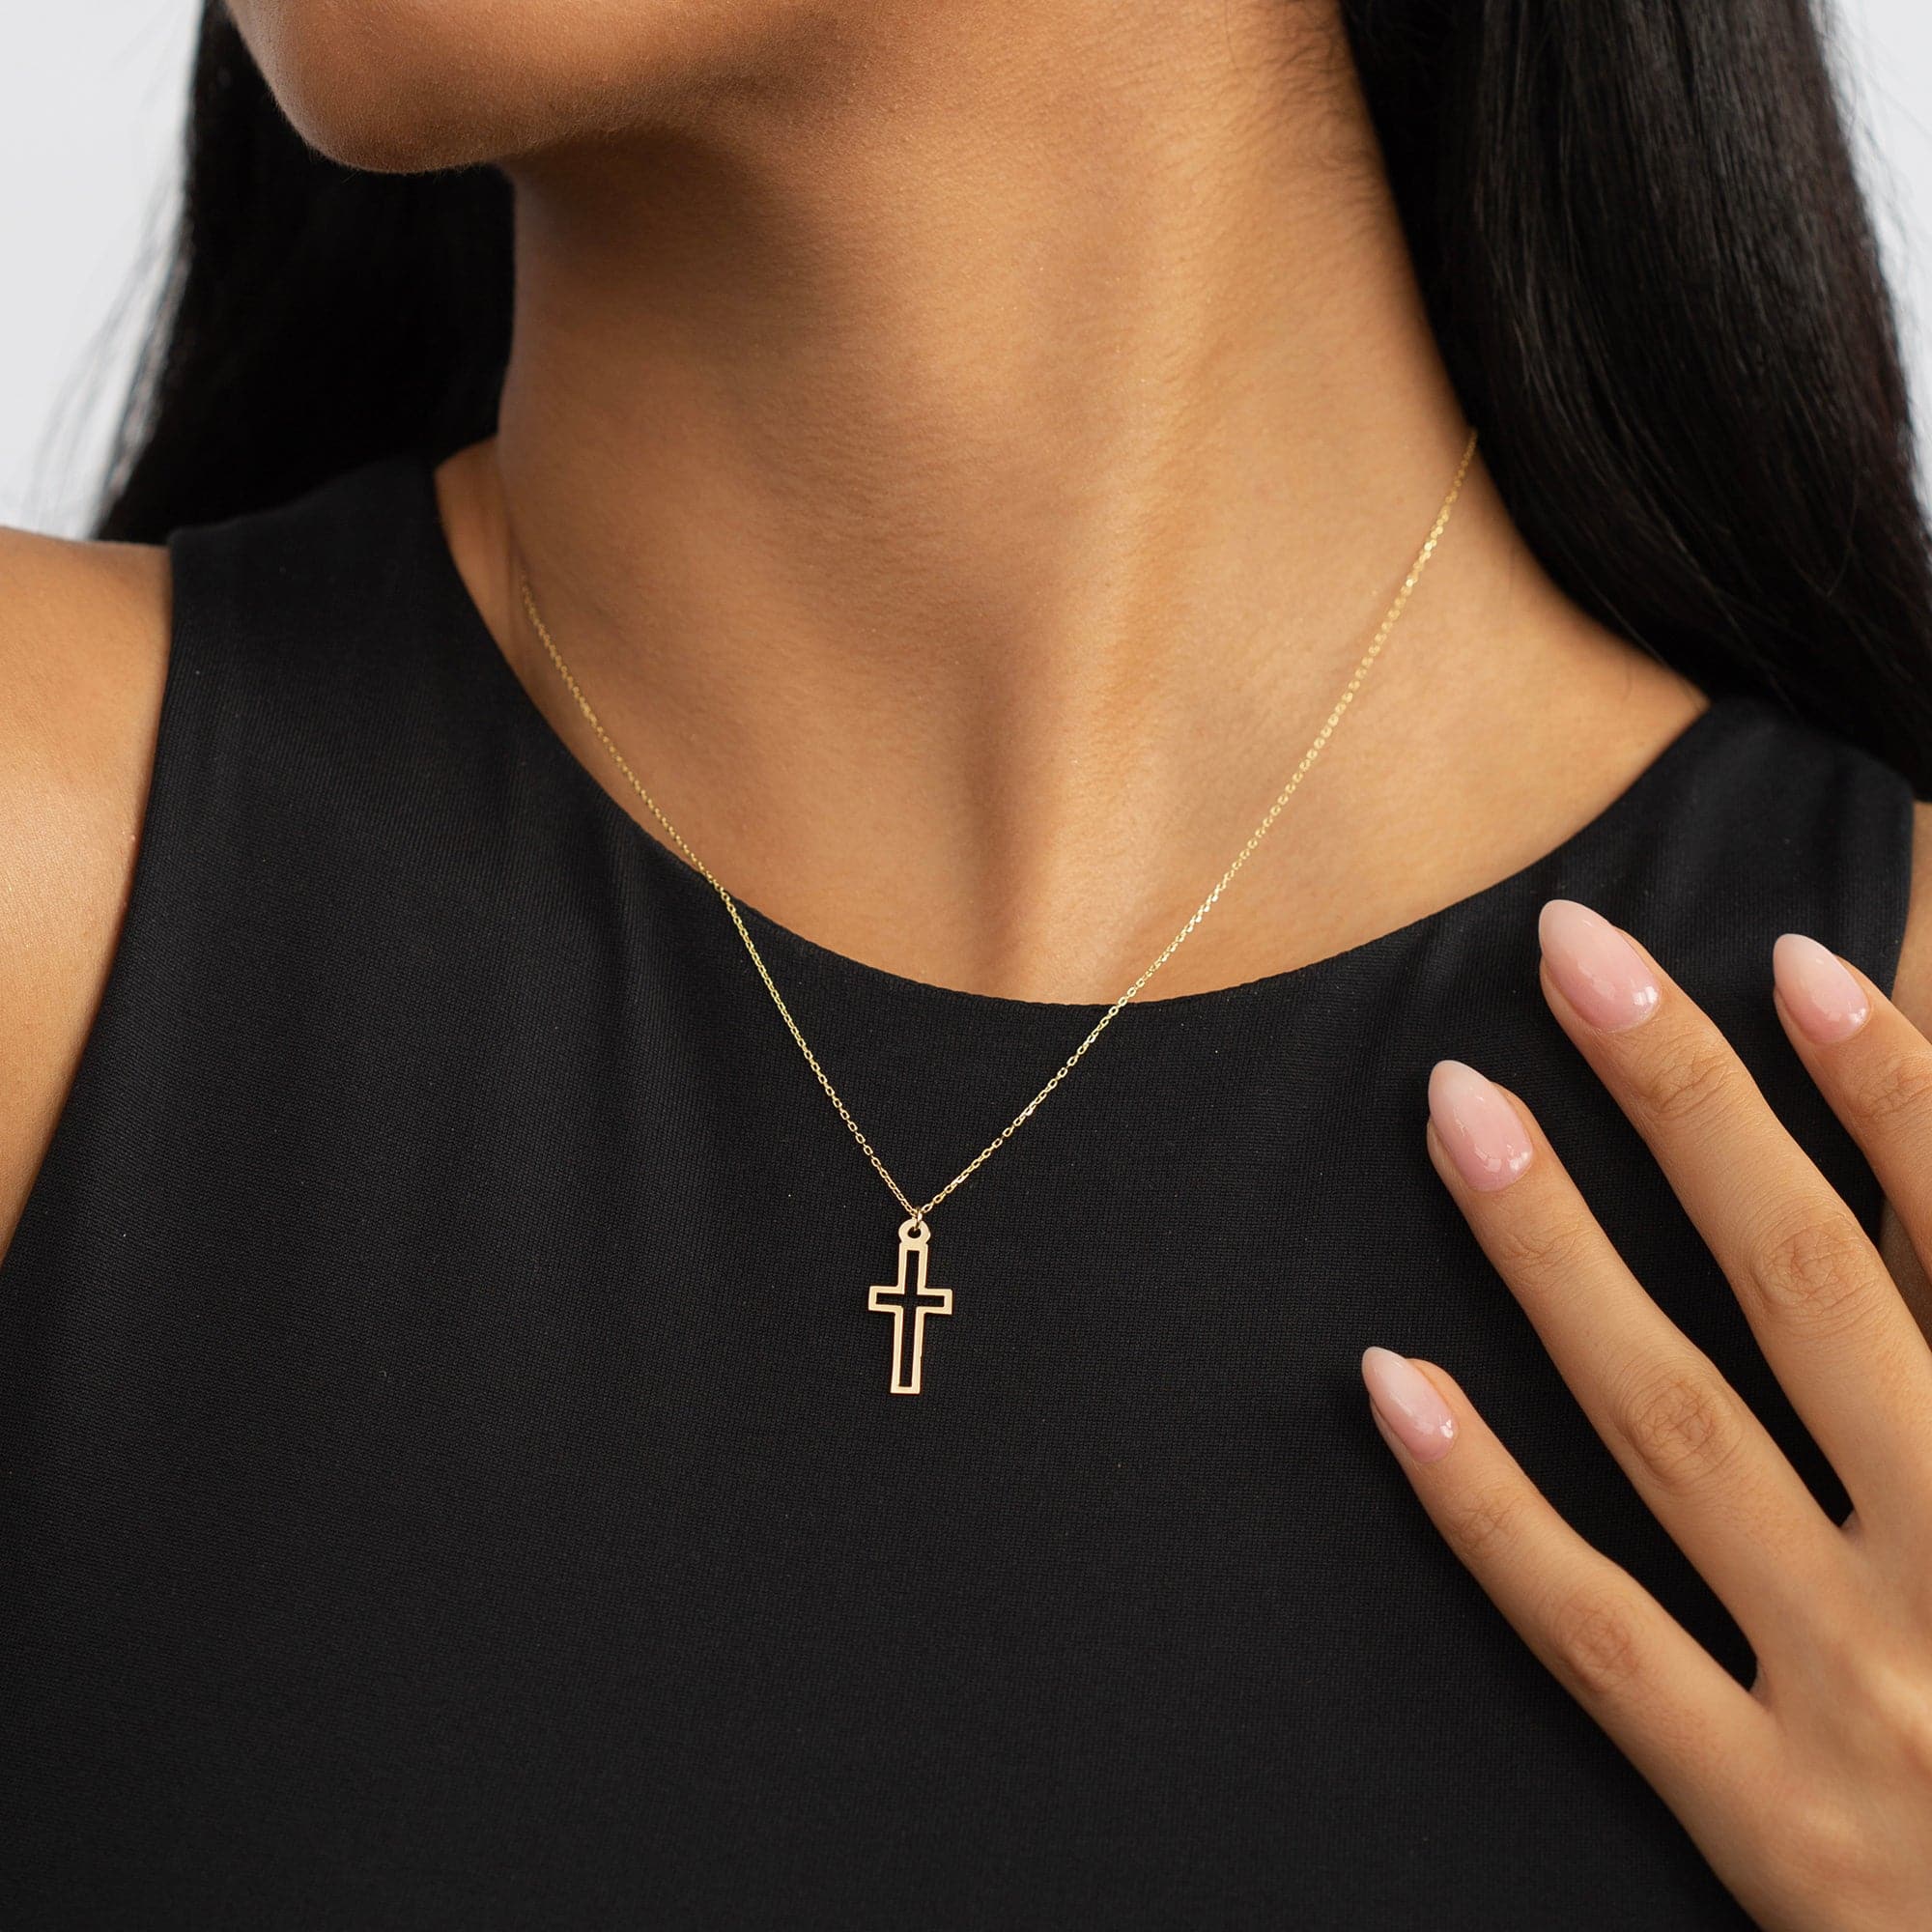 gold cross chain necklace